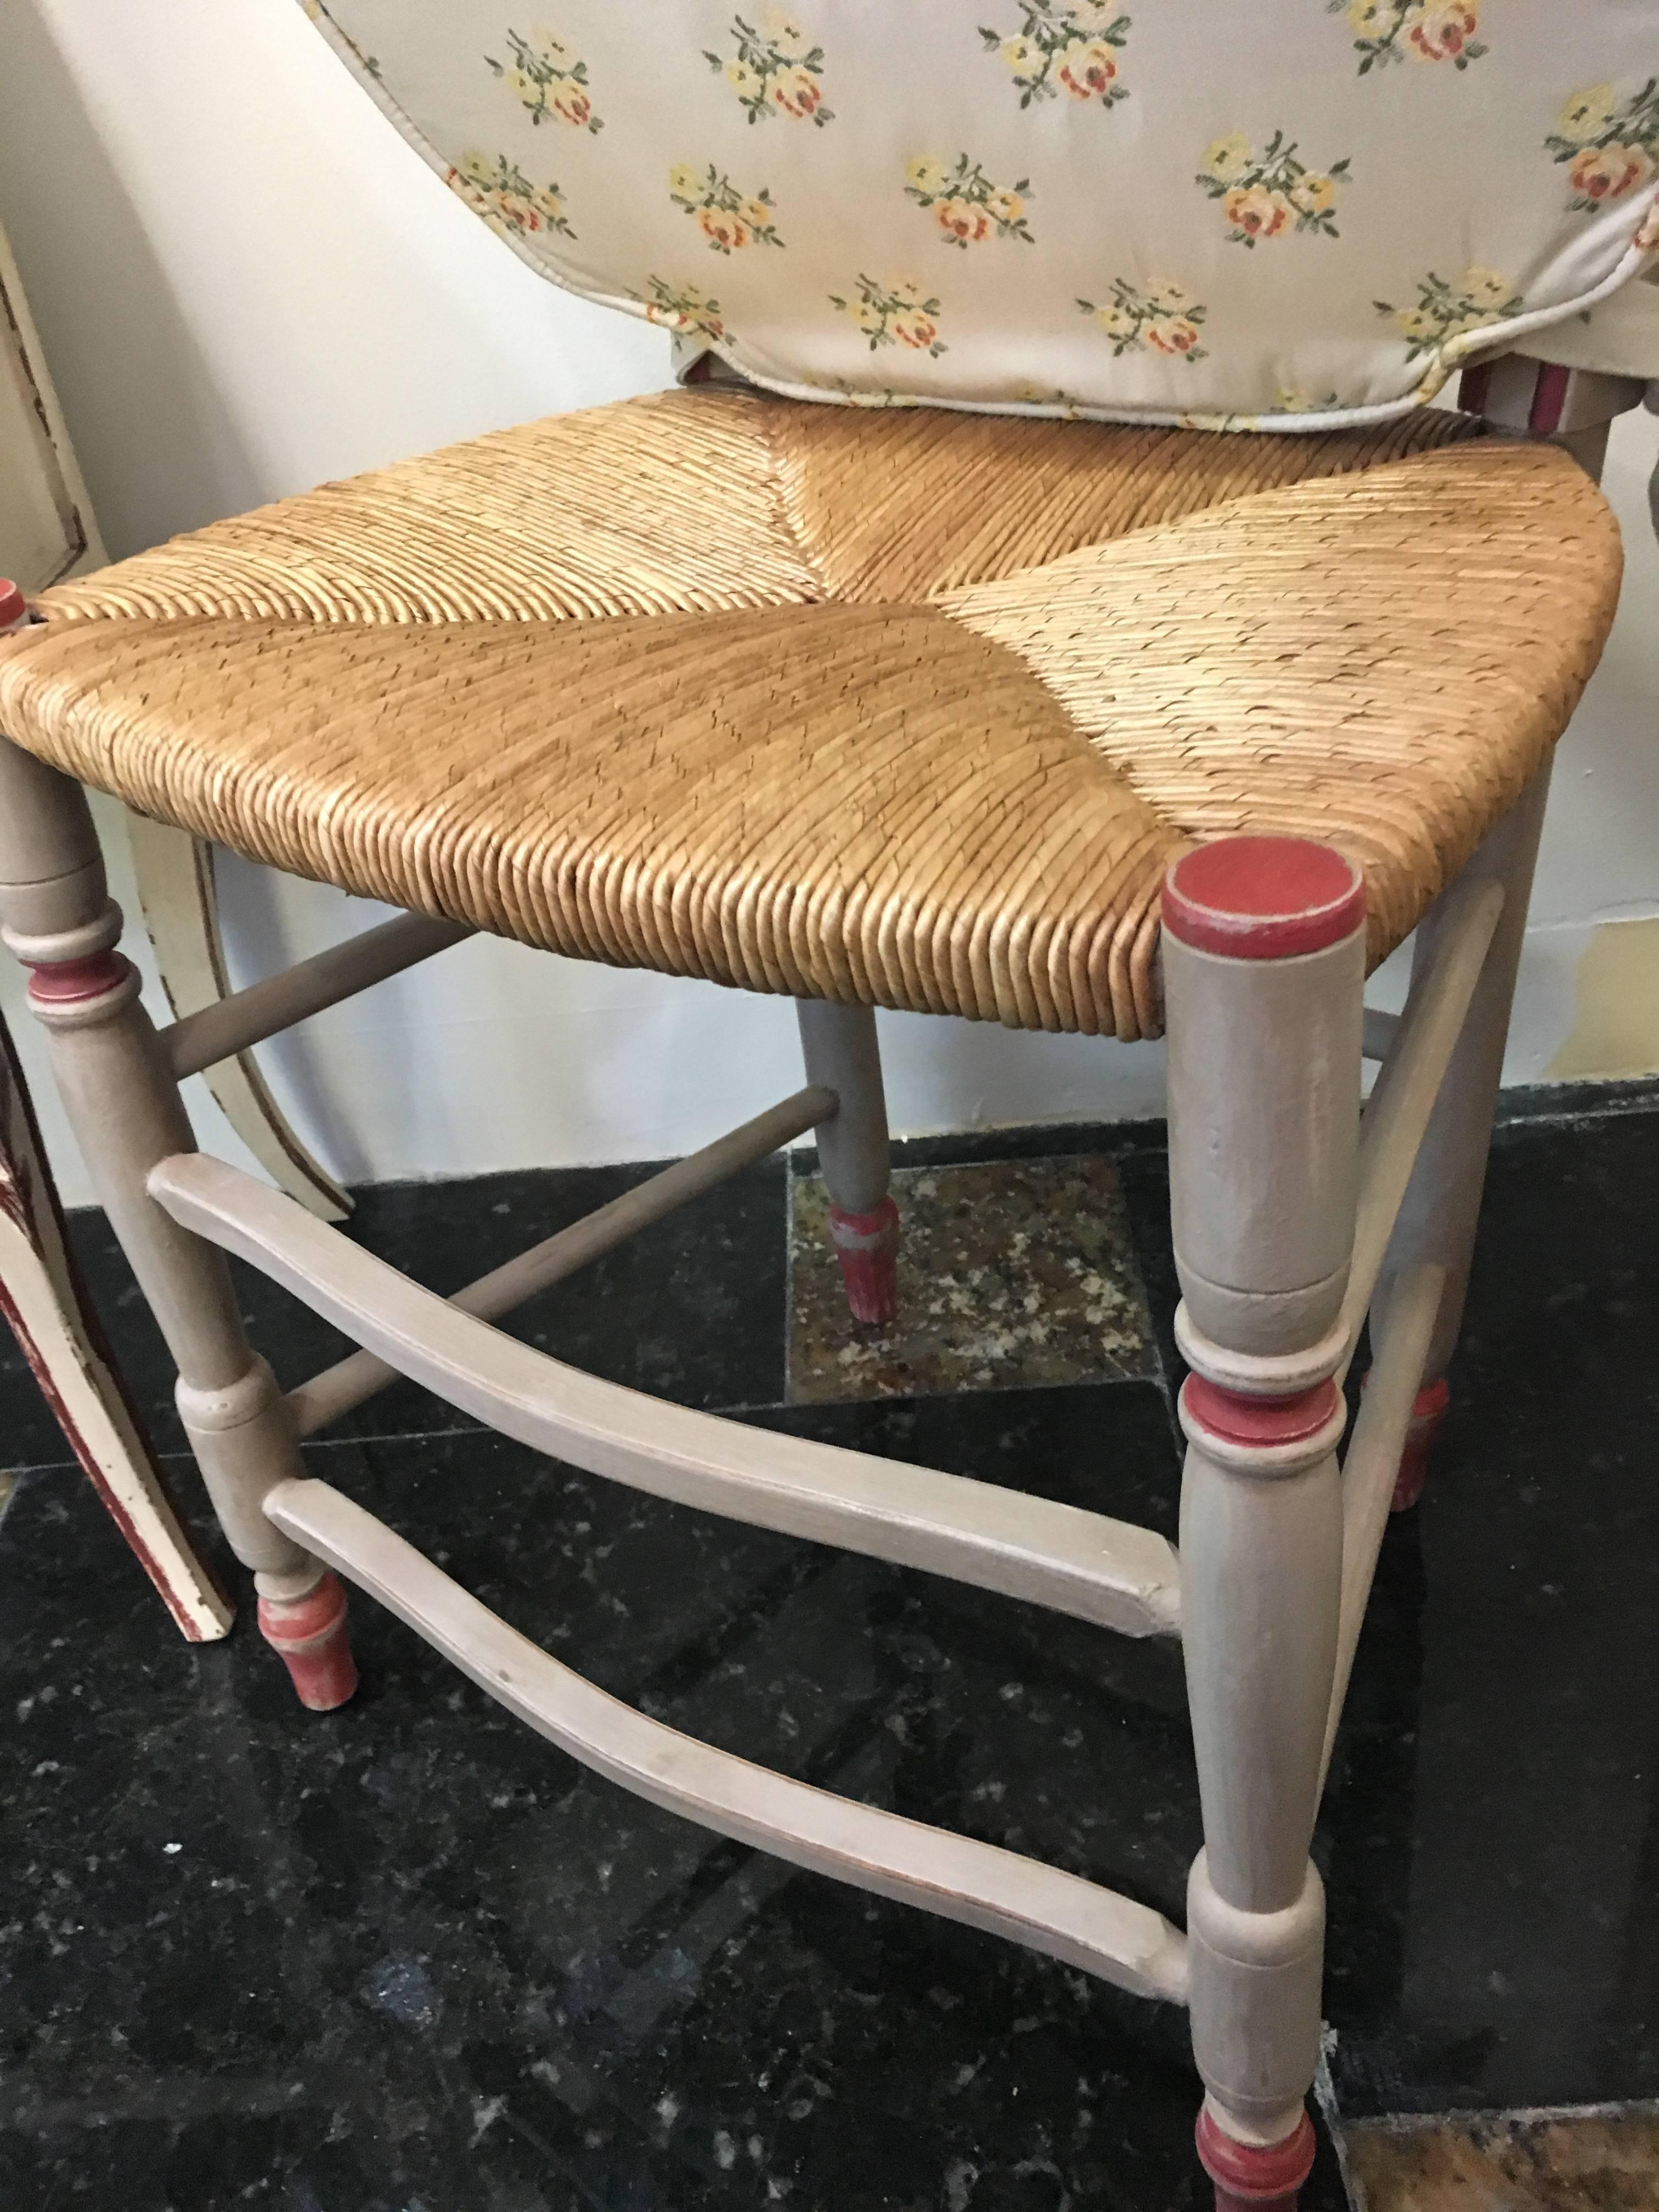 Six dining chairs from 19th century. Painted in light grey with coral accents, rush seats with nice cotton seating cushions covered with small colorful flowers.
All in perfect condition. Could be sold separately.